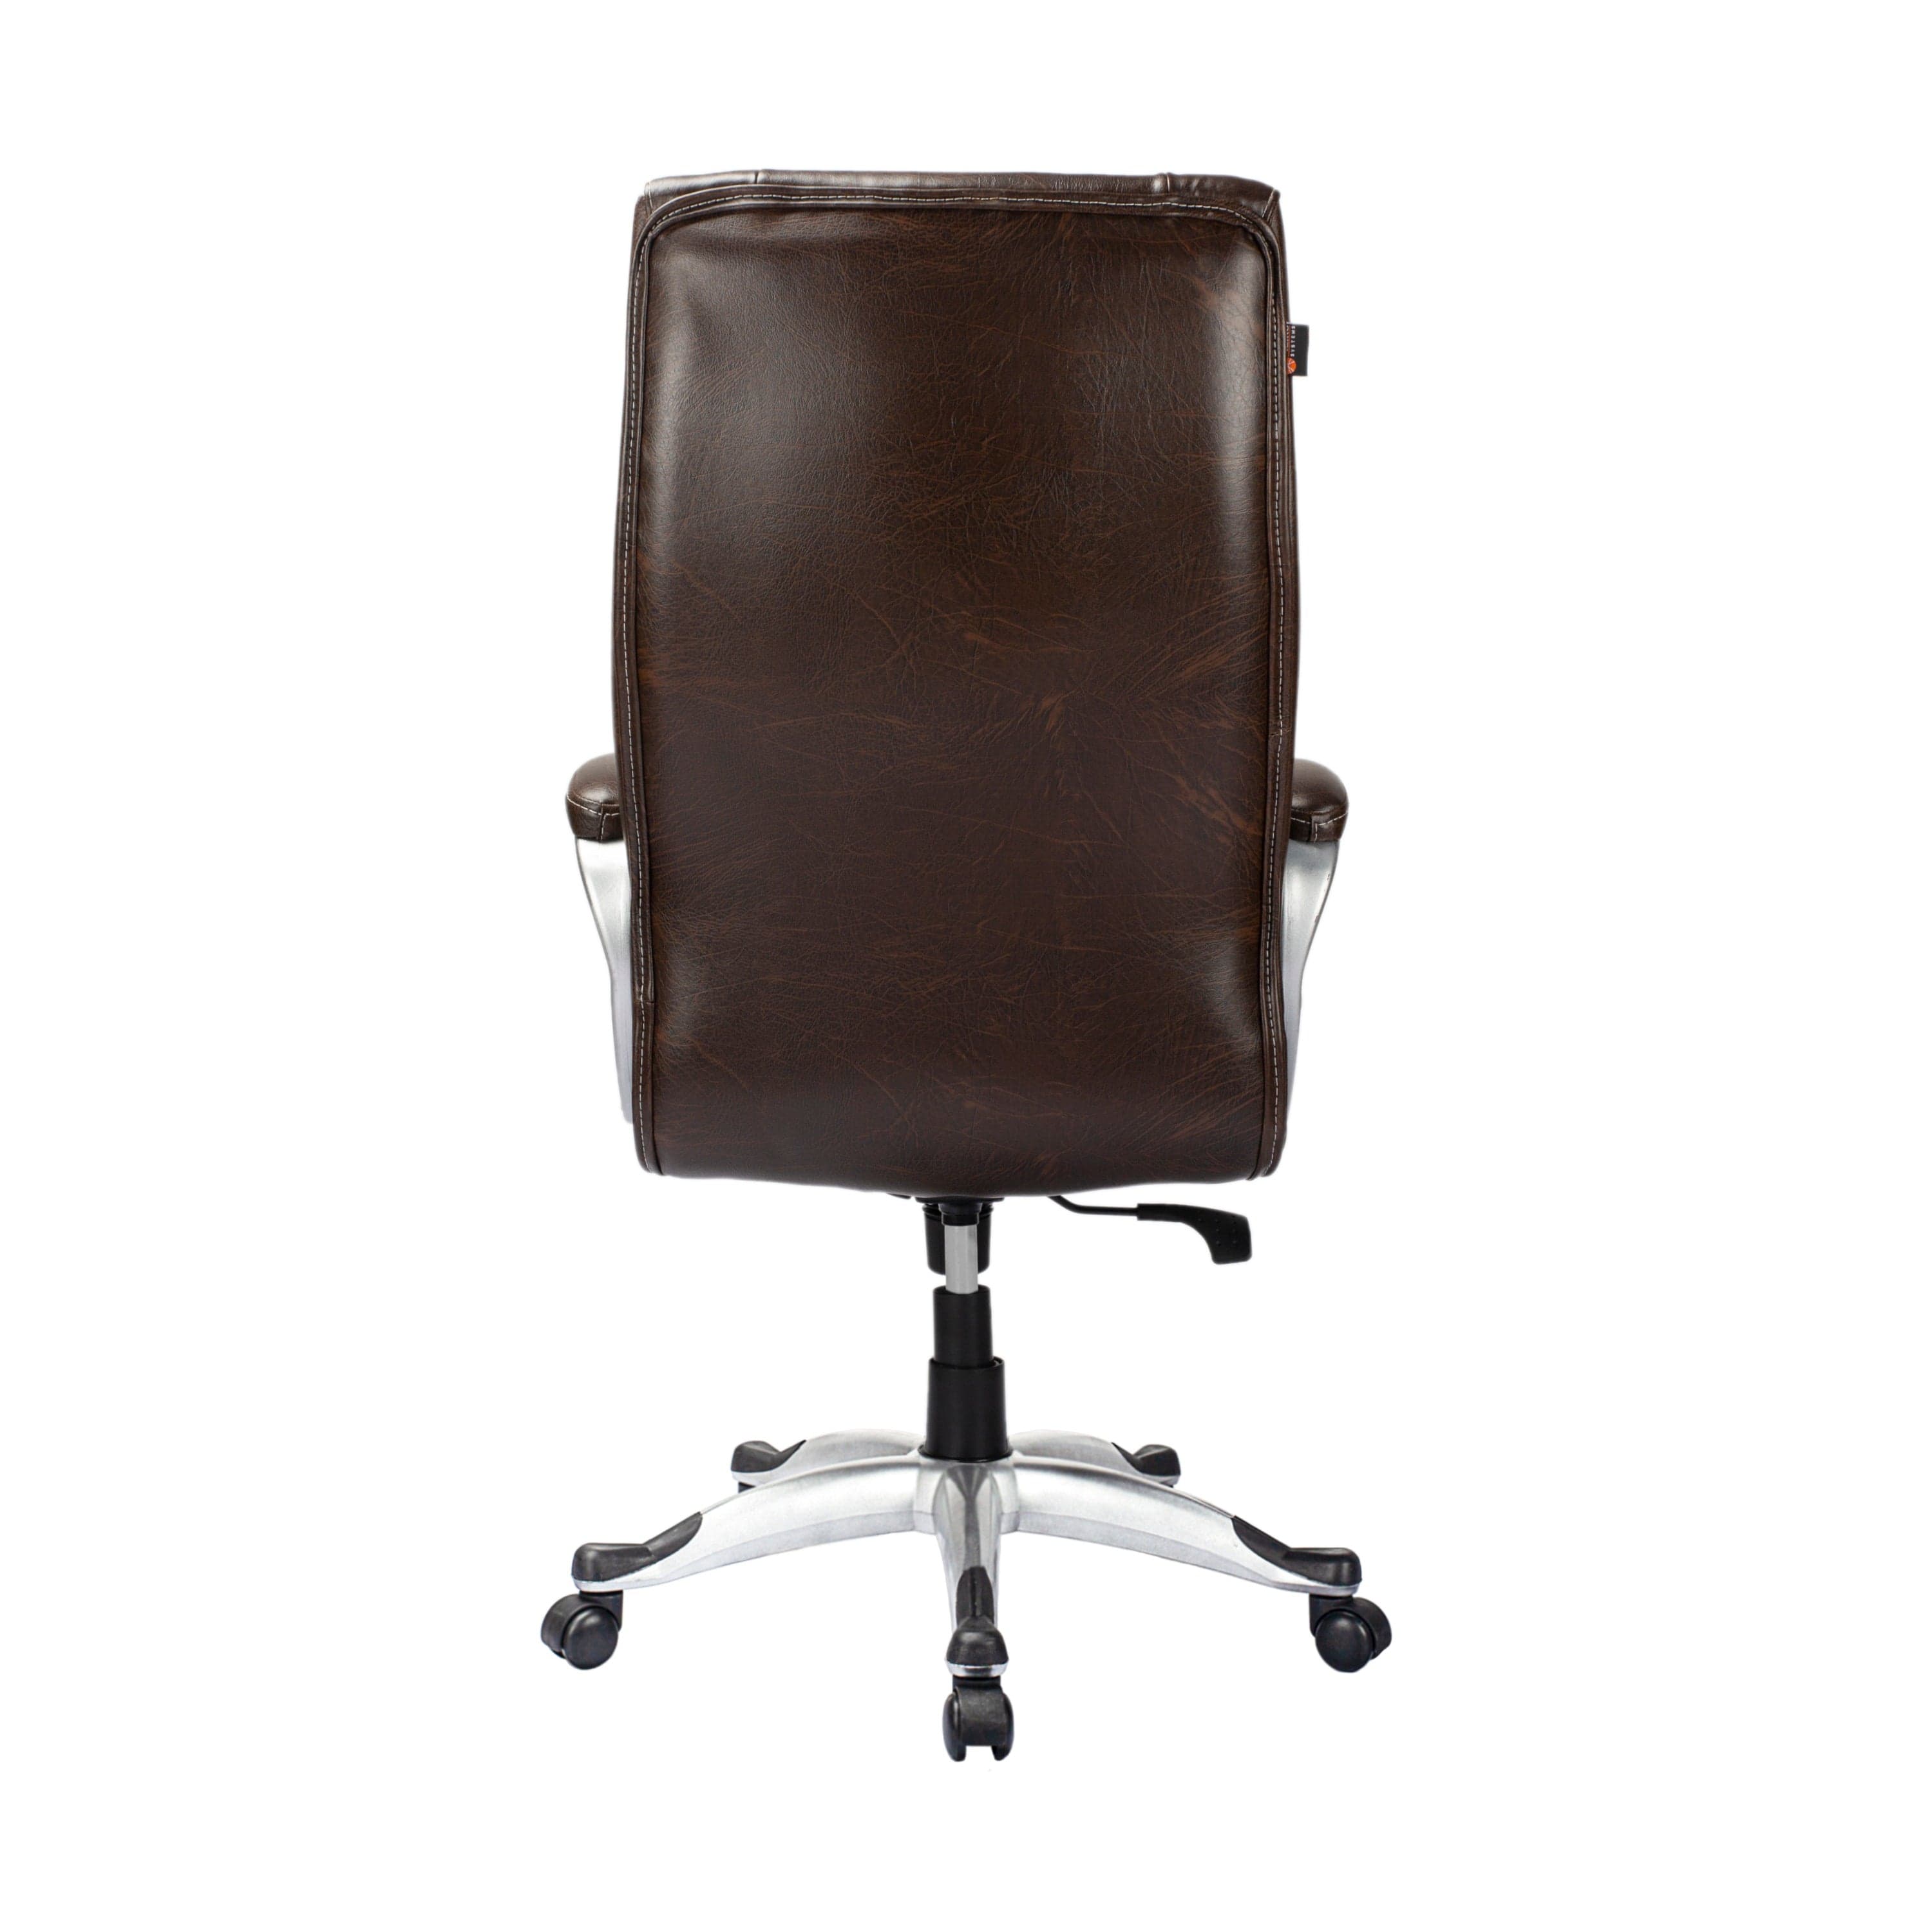 Adiko High Back Executive Revolving Office Chair in Brown